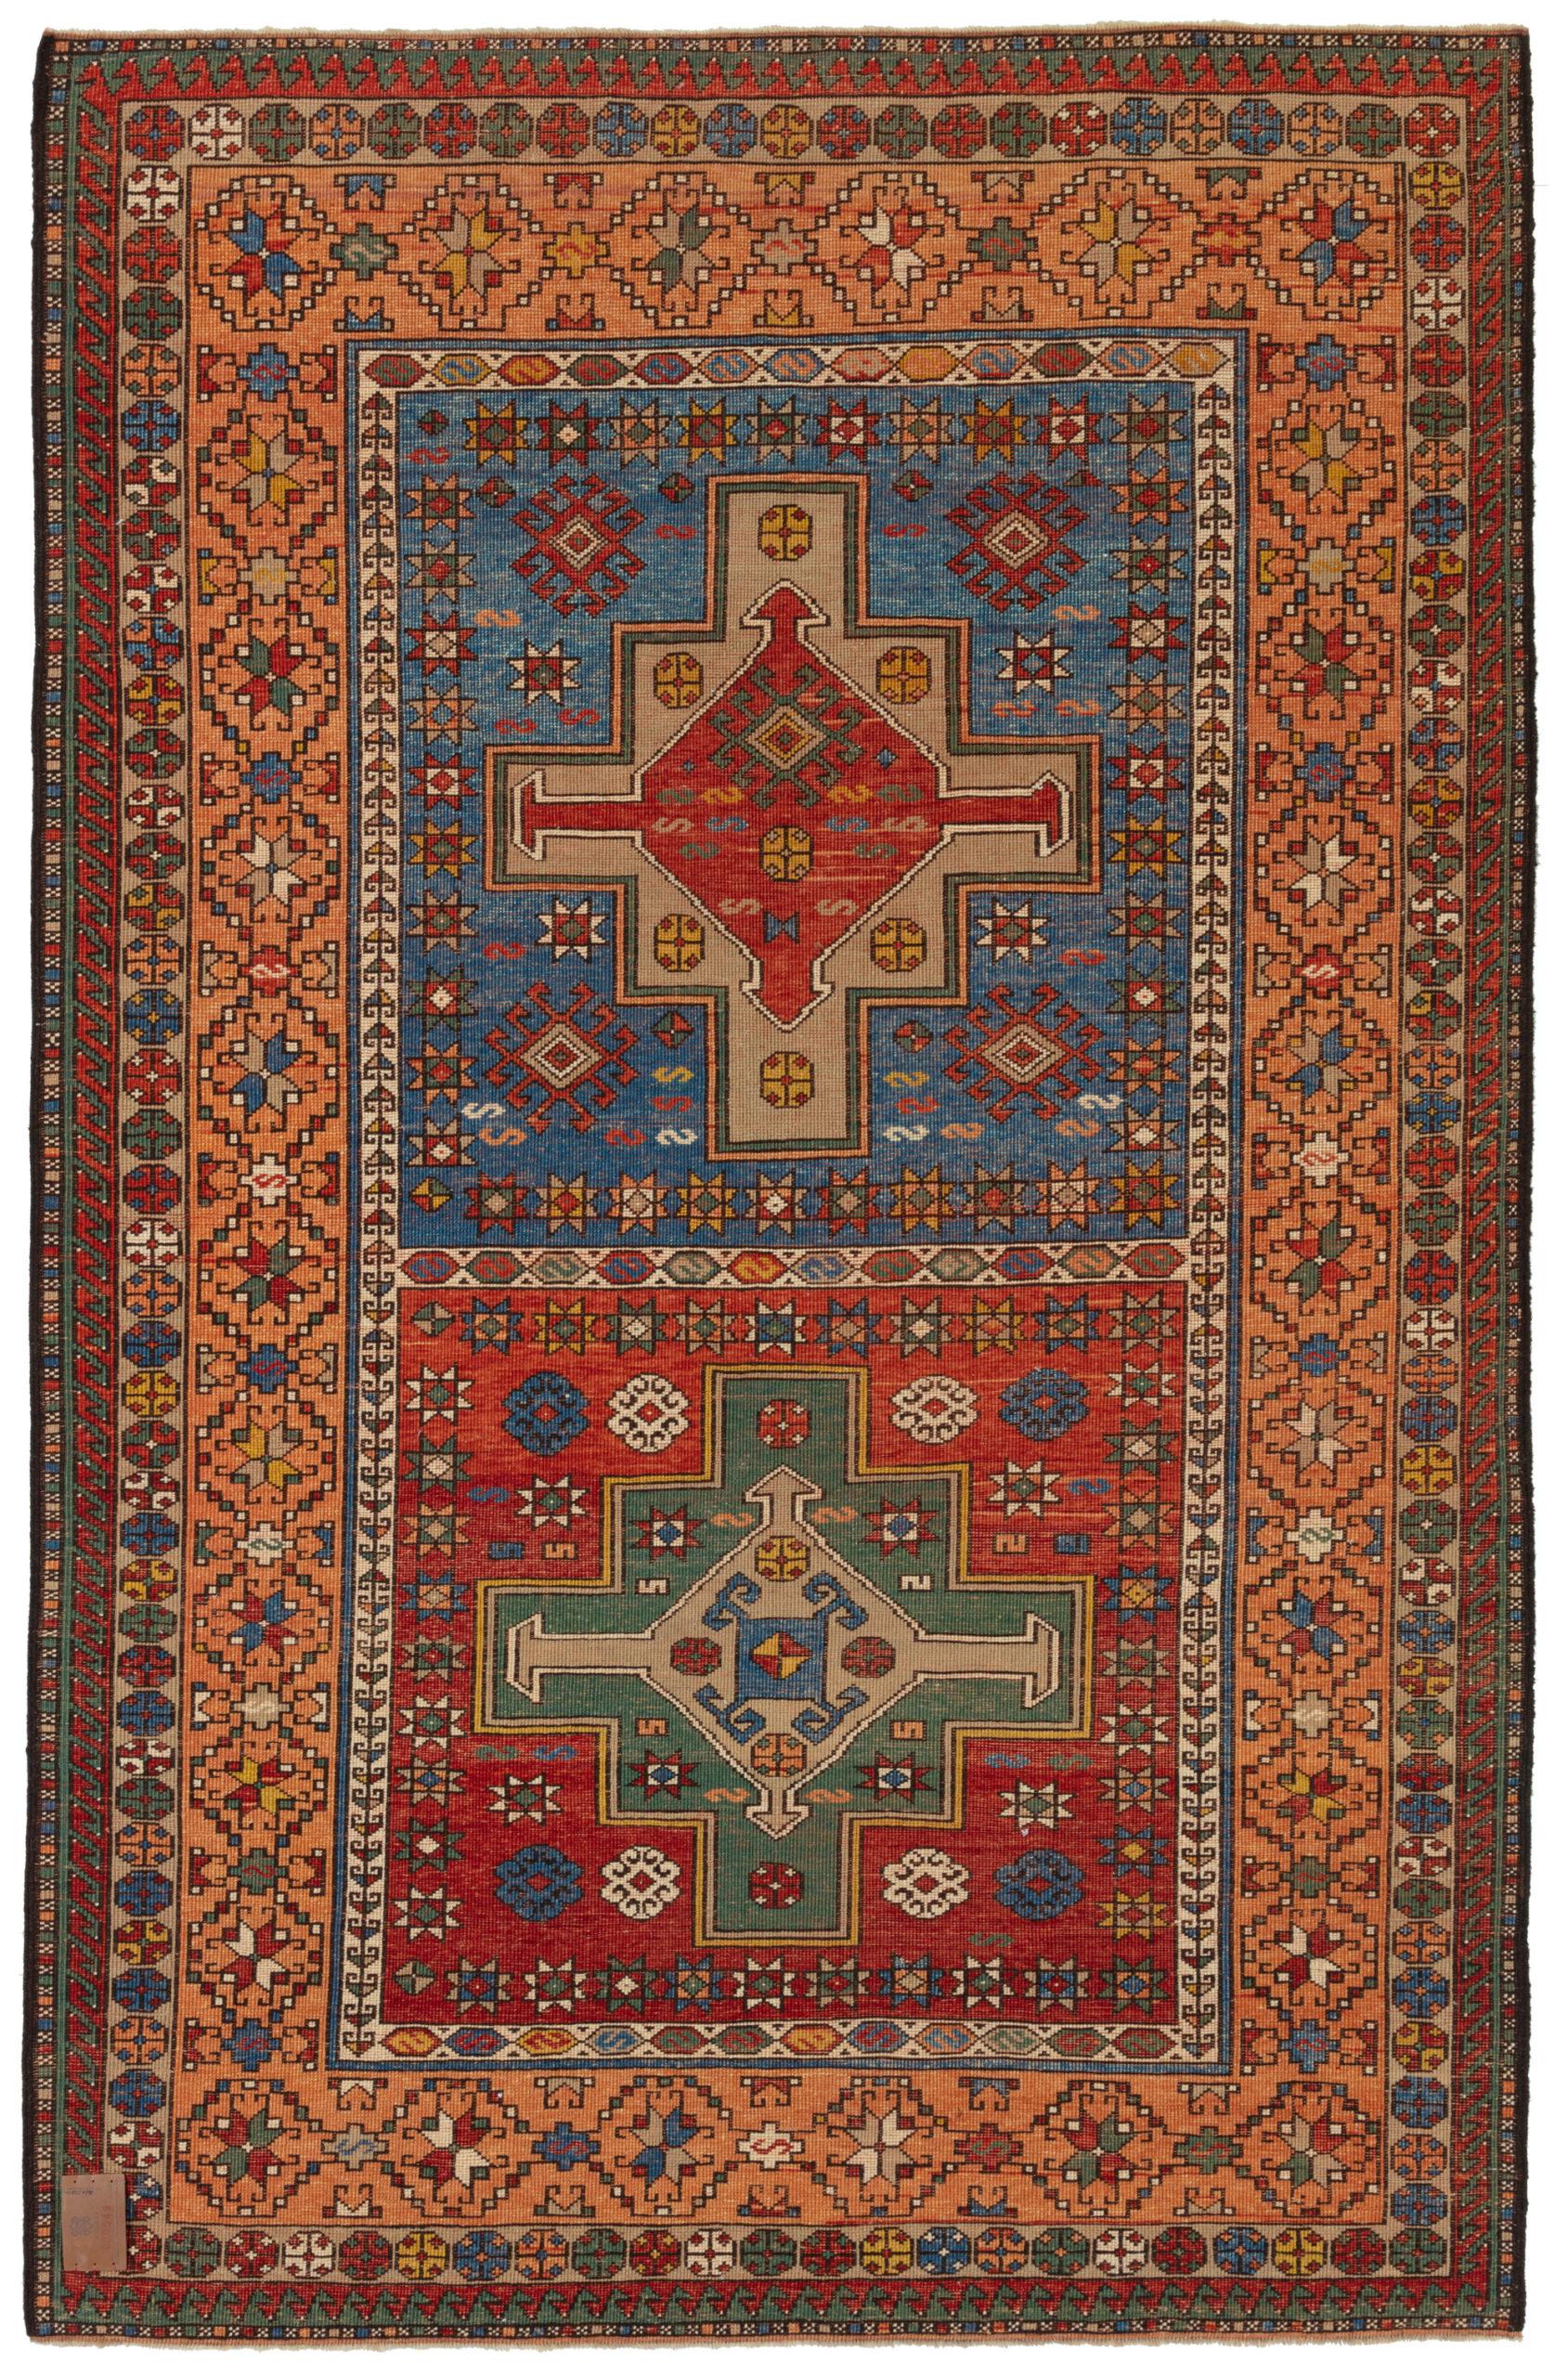 This is a Two Medallion Kagizman Kazak Rug, also known as Caucasian Kazak rug, is a type of handwoven rug that originated from the Kagizman region in northeastern Turkey, near the border with Armenia. These rugs are named after the Kazak tribes who